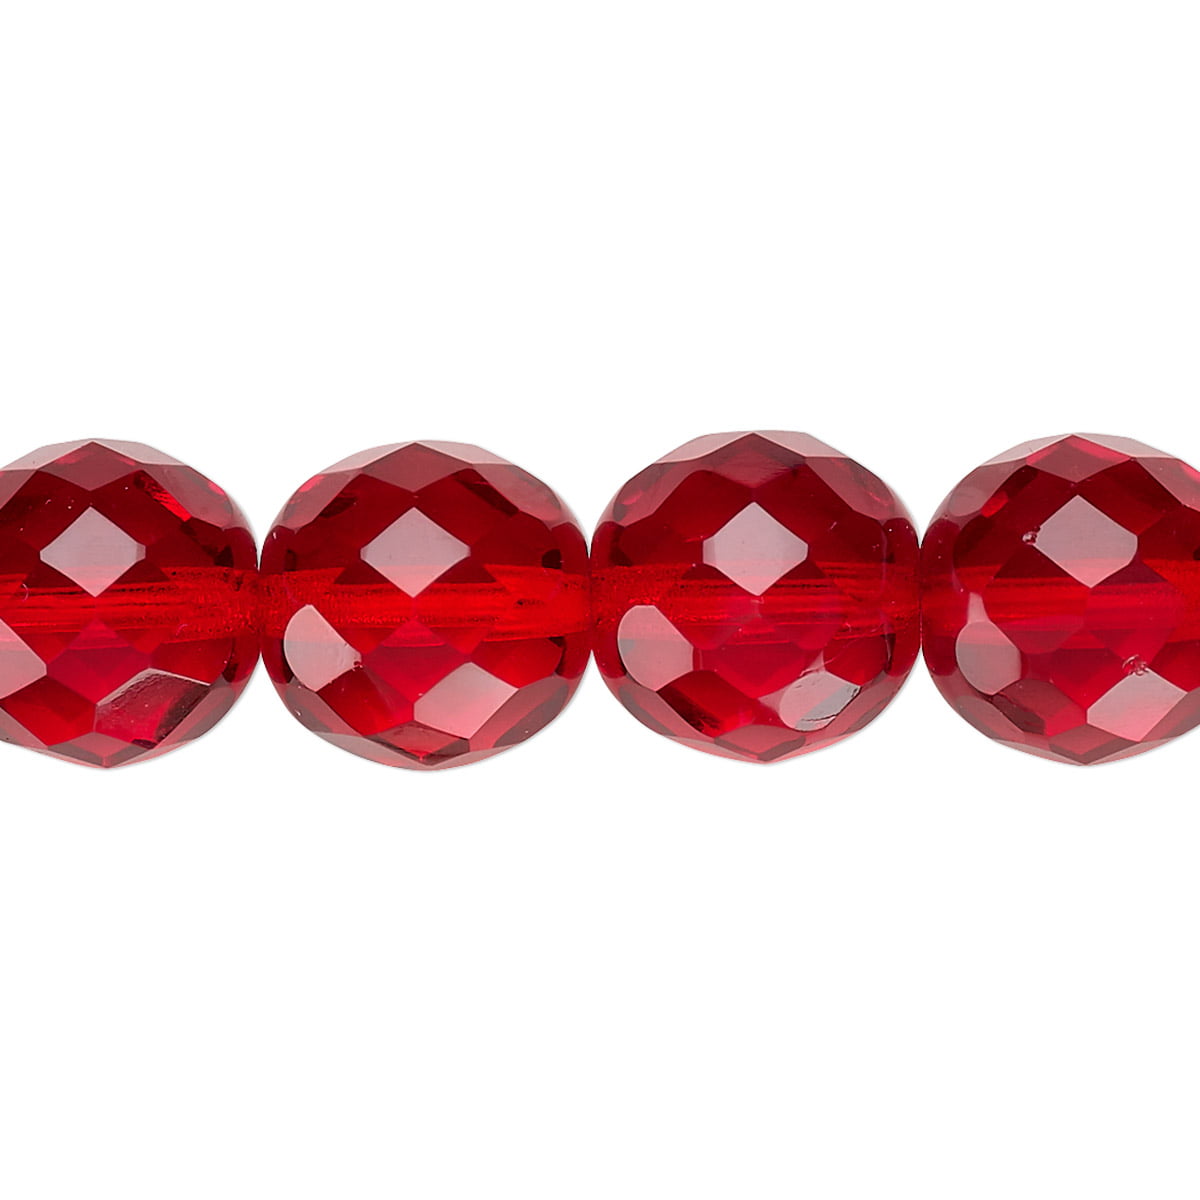 Silver 10 Volcanic Eruption Ruby/Lady Bug Red Facet Rounds 8mm Czech Glass 